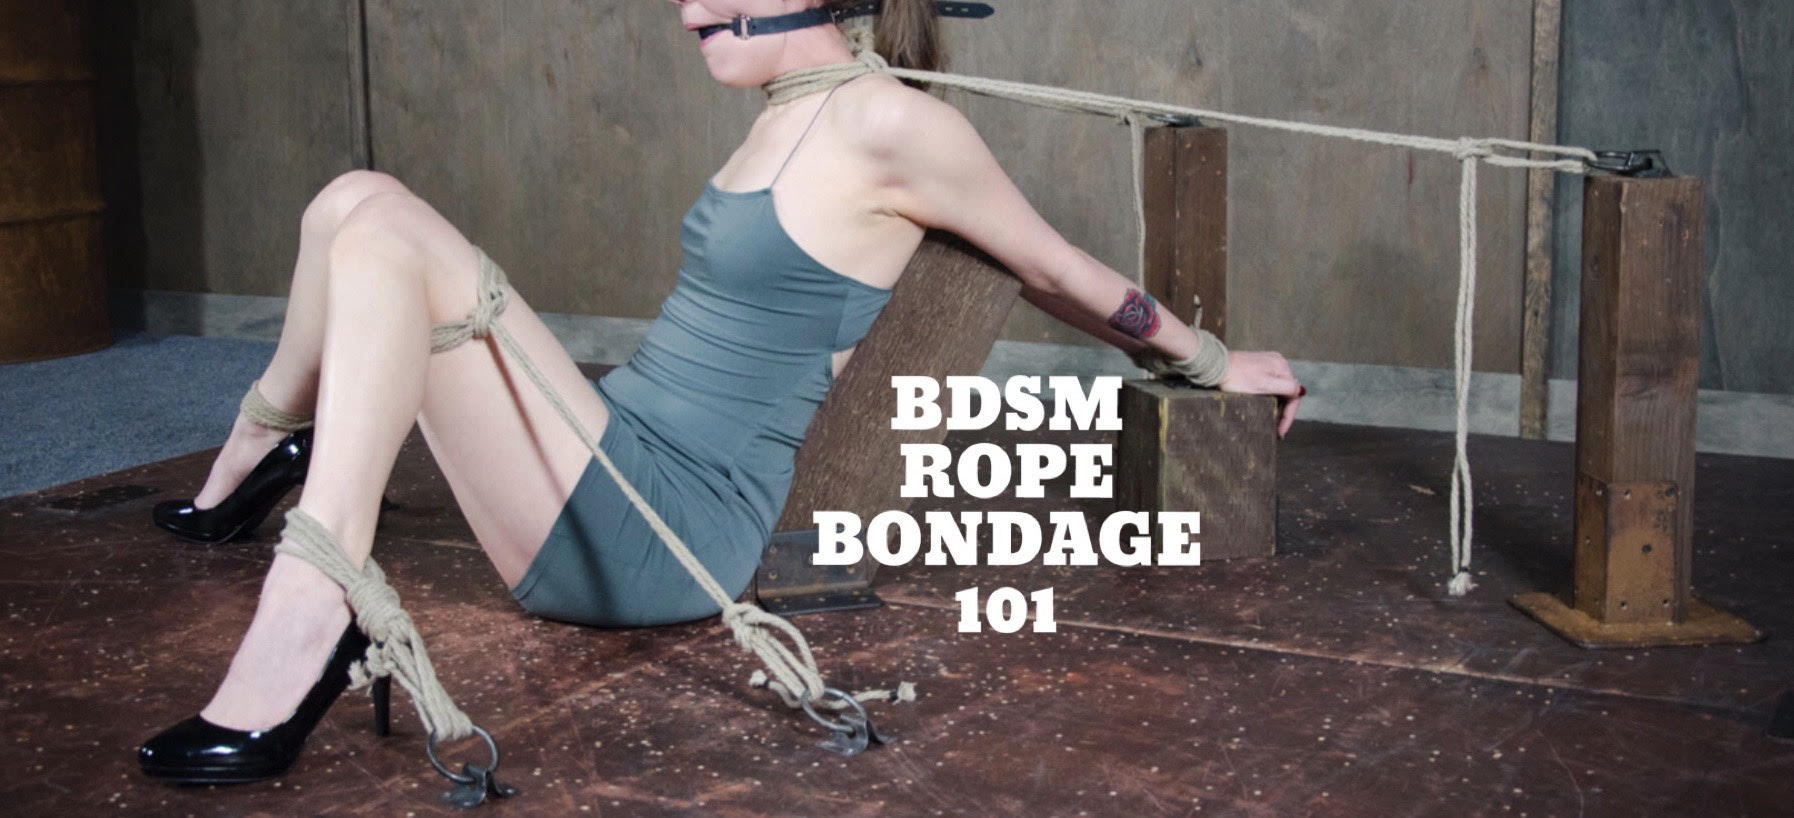 BDSM Travel Guide: Plan a Kinky Vacation